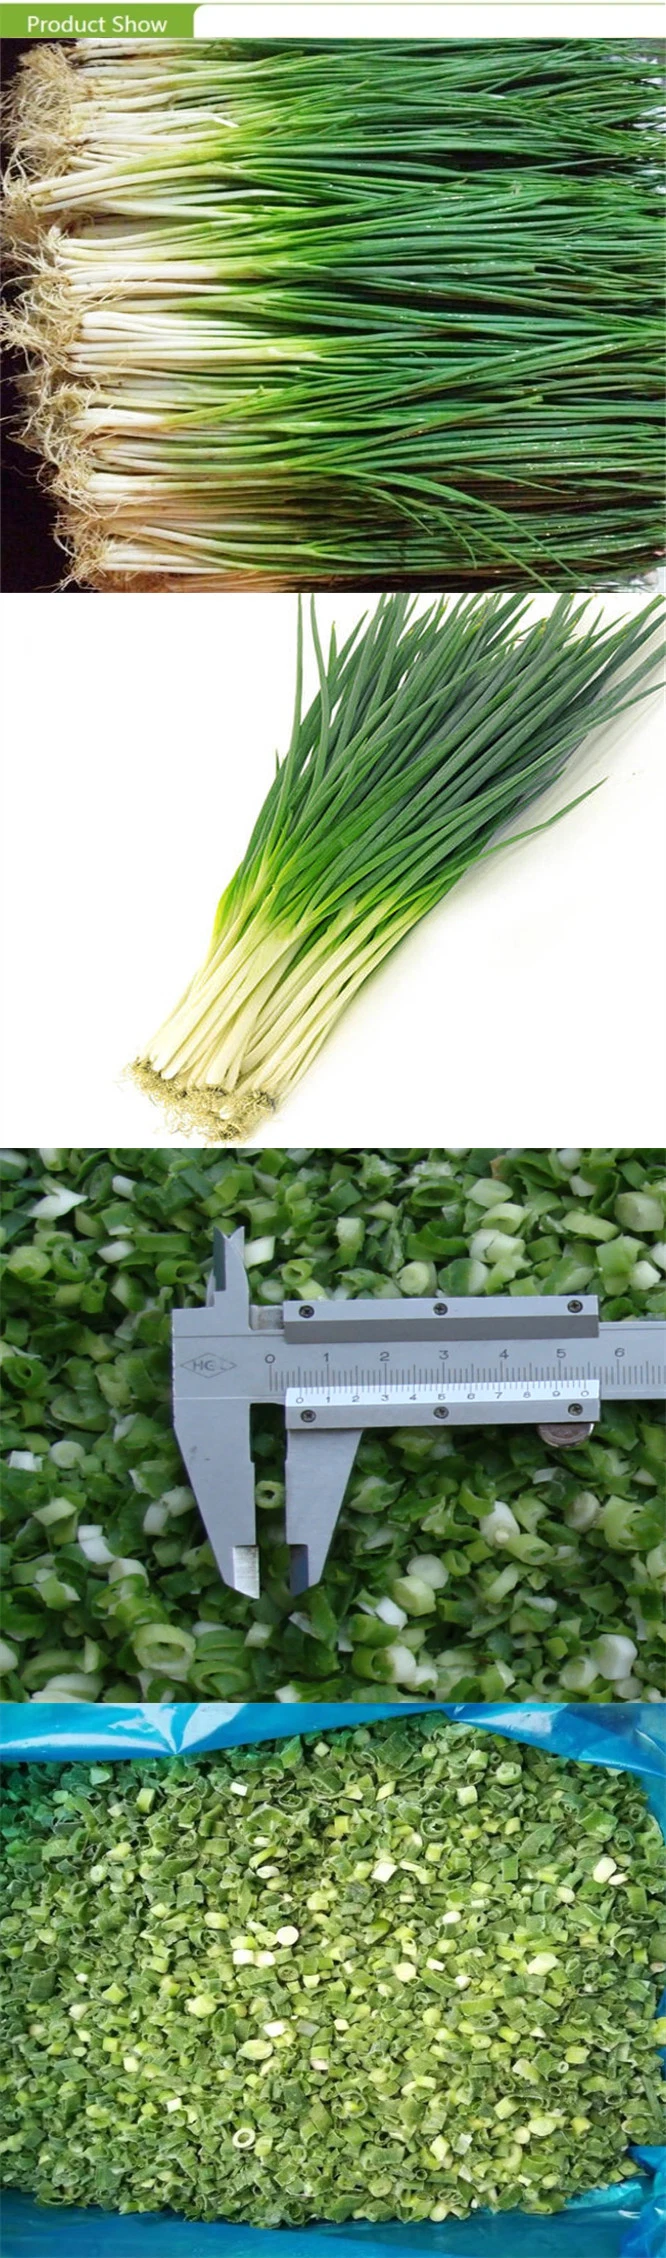 New Crop IQF High Quality Diced Chives with Good Price